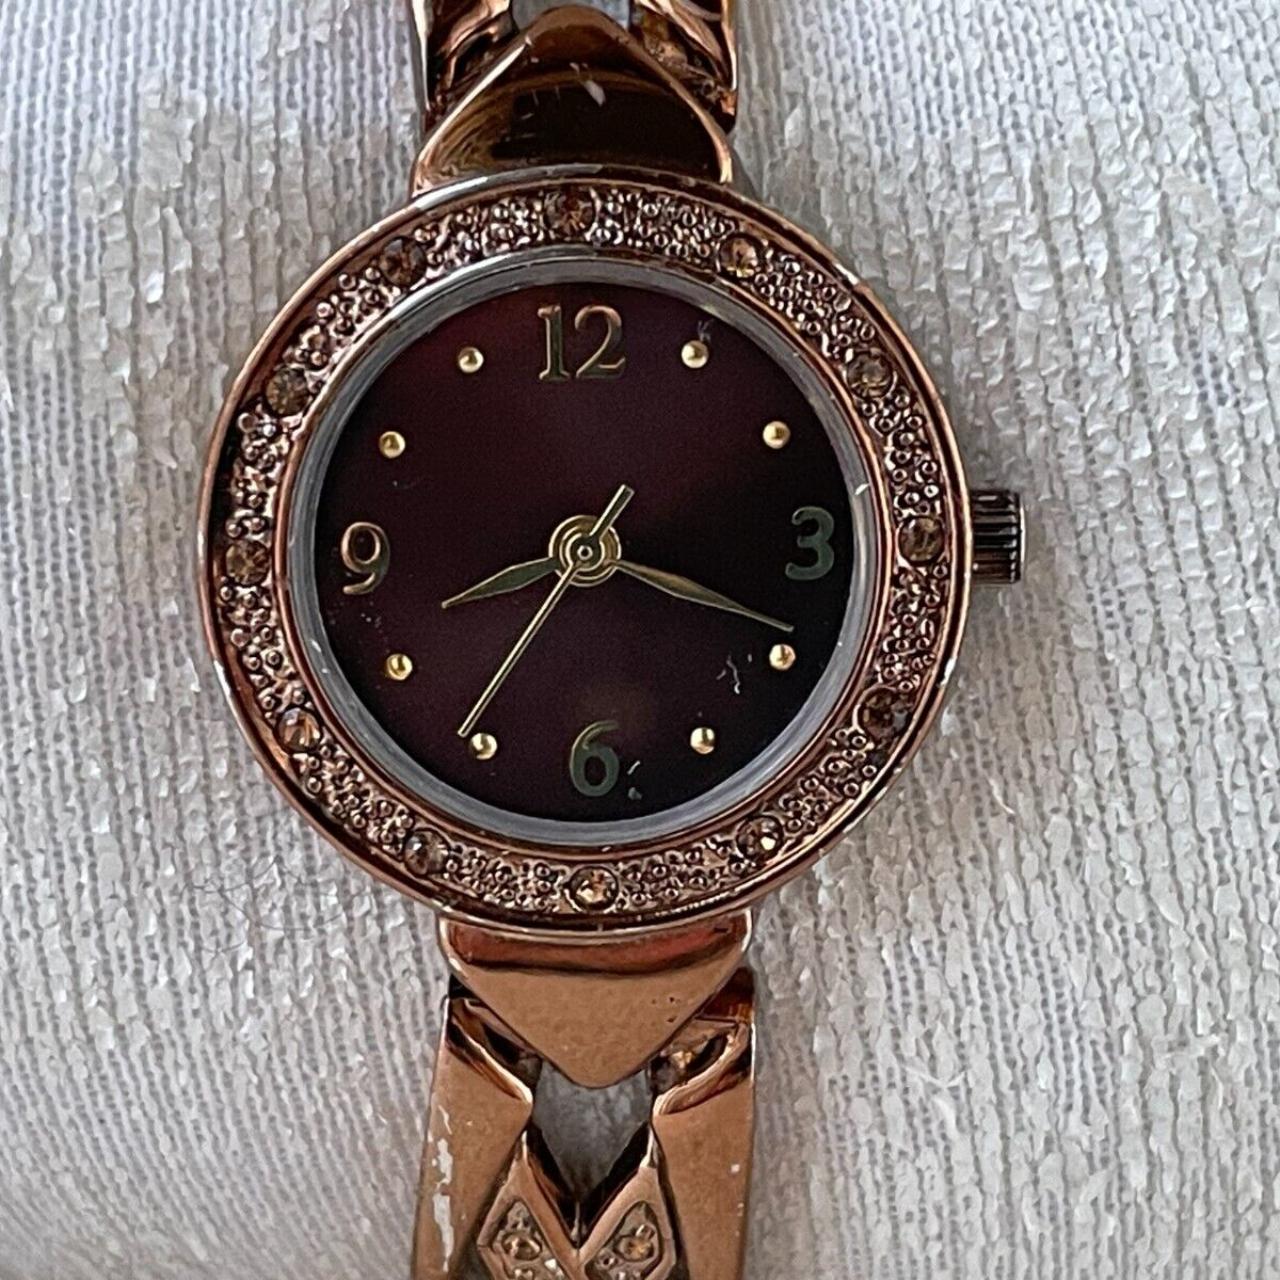 Free: mens diamond allude watch - Other Jewelry & Watch Items - Listia.com  Auctions for Free Stuff